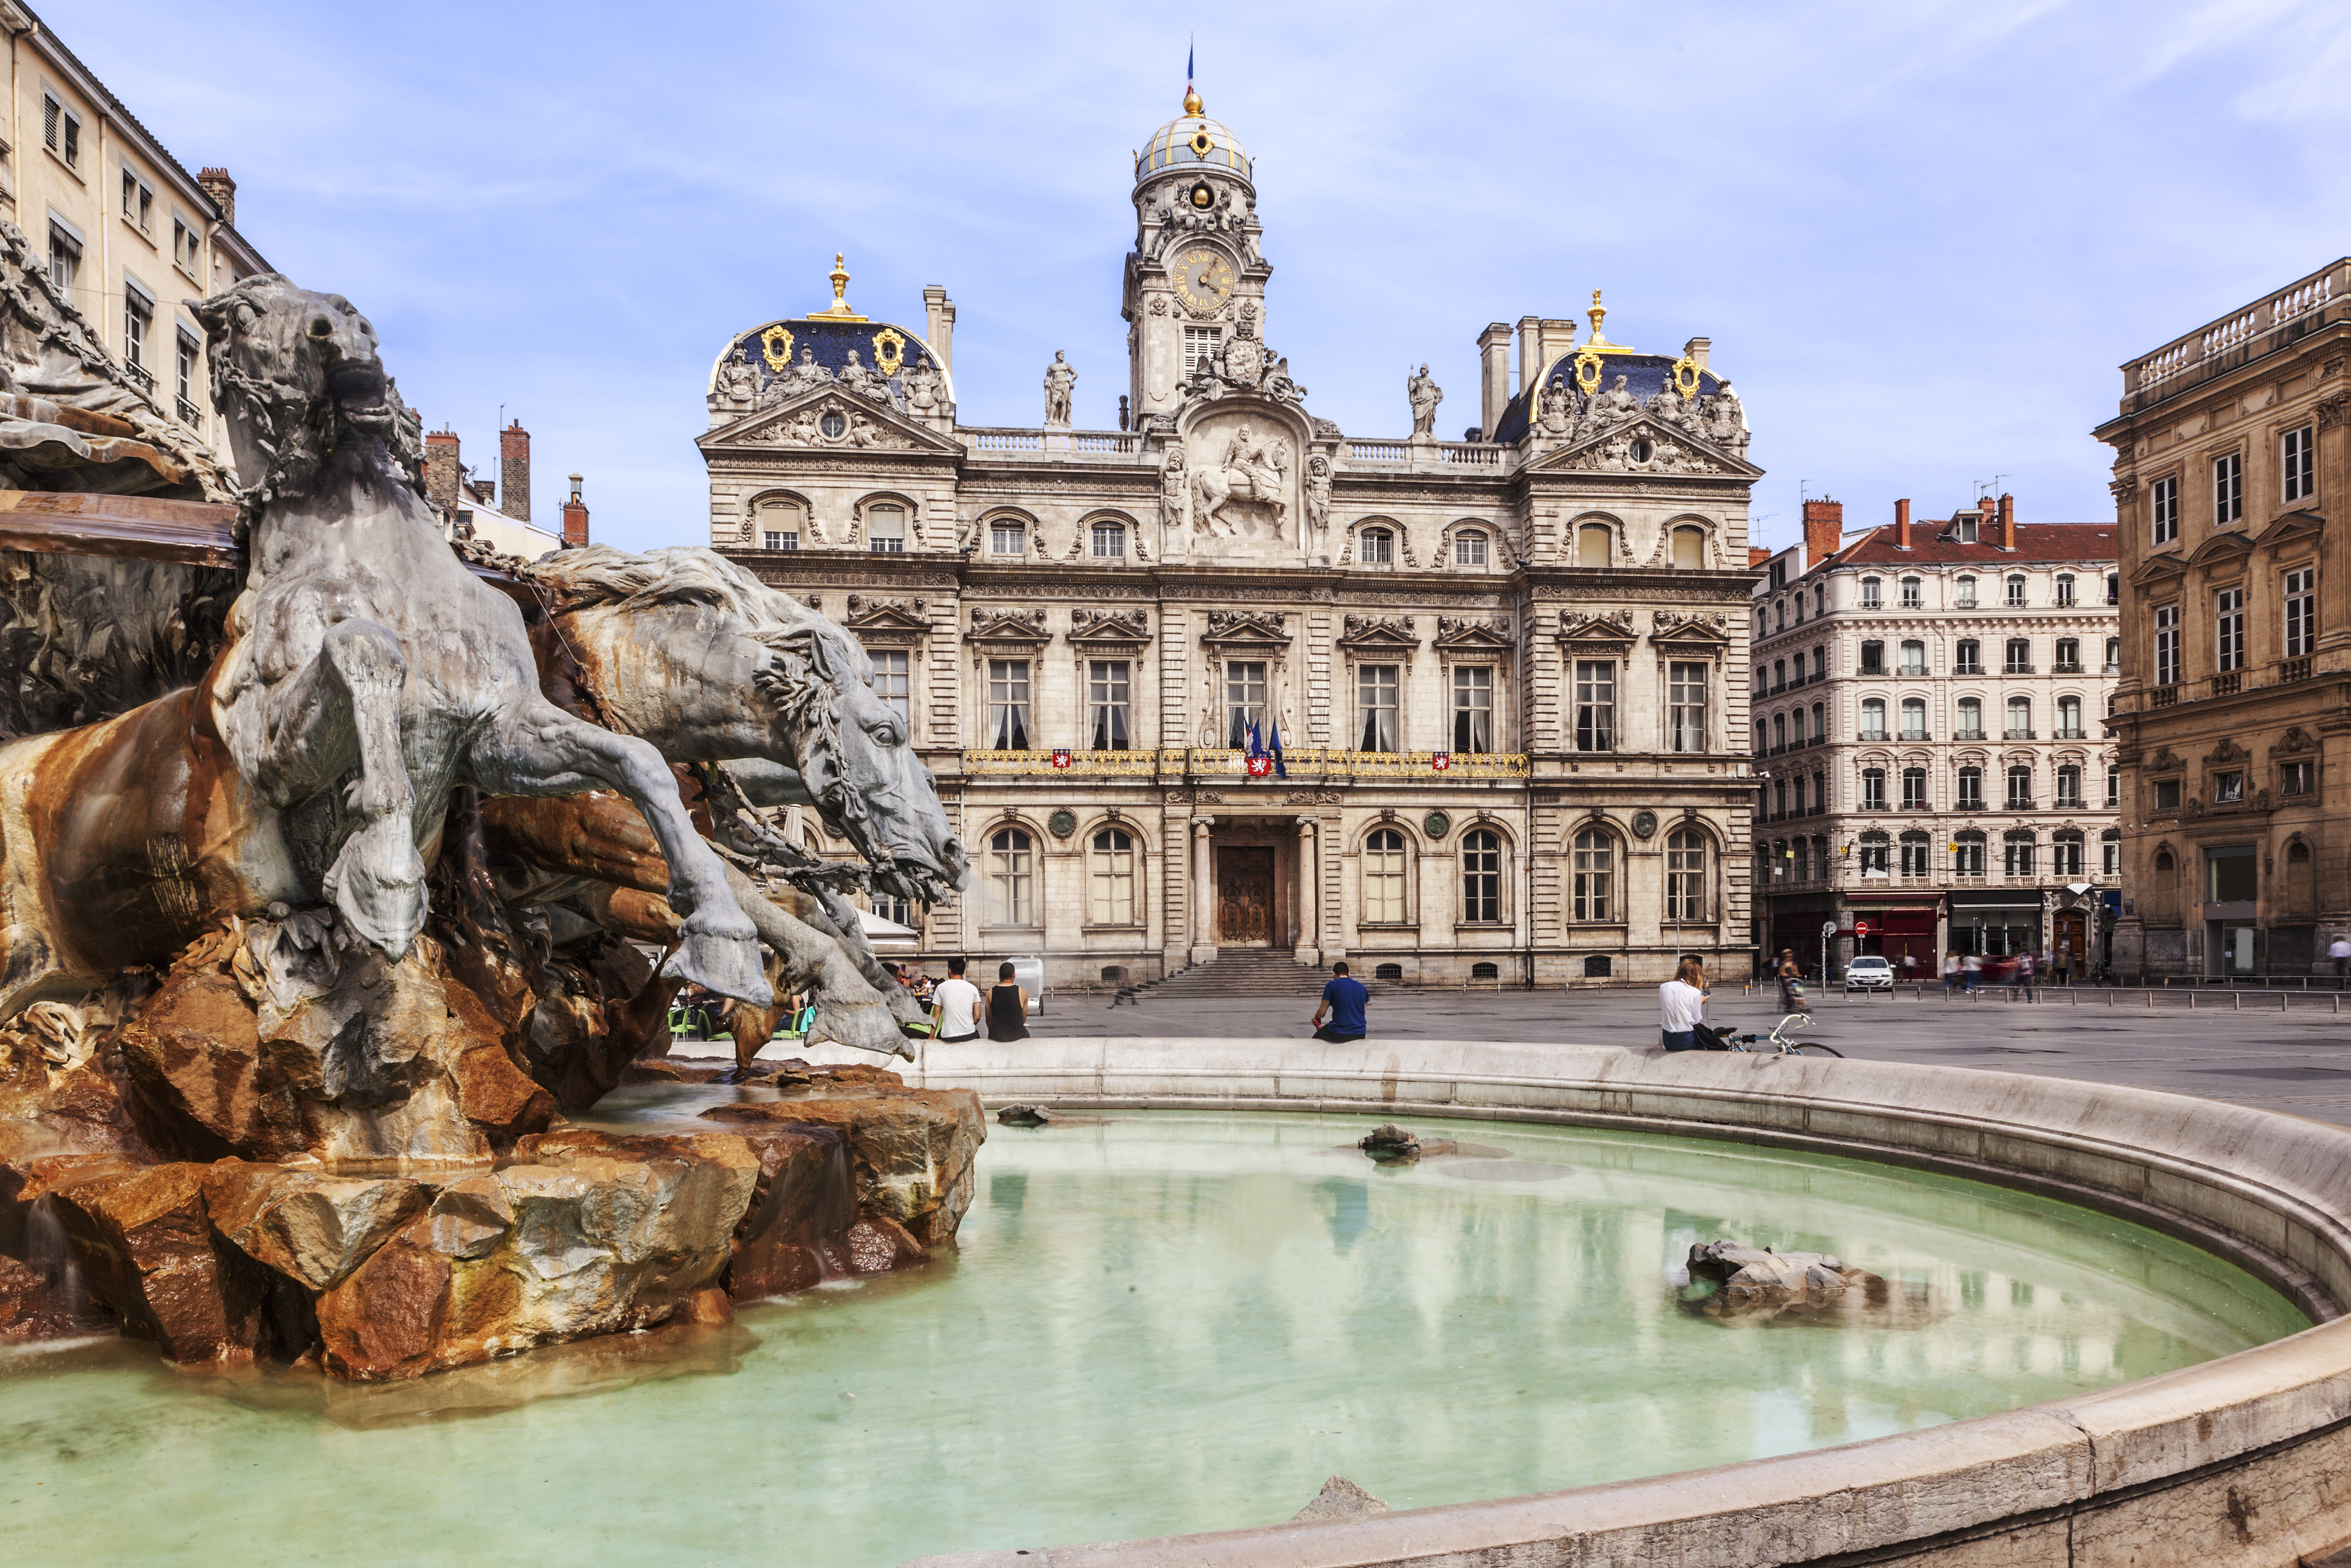 The thriving city of Lyon, known for its winding streets and three hills, offers a variety of runs. From the heights of the Croix-Rousse to the banks of the Rhône, there are plenty of ways to run in Lyon!